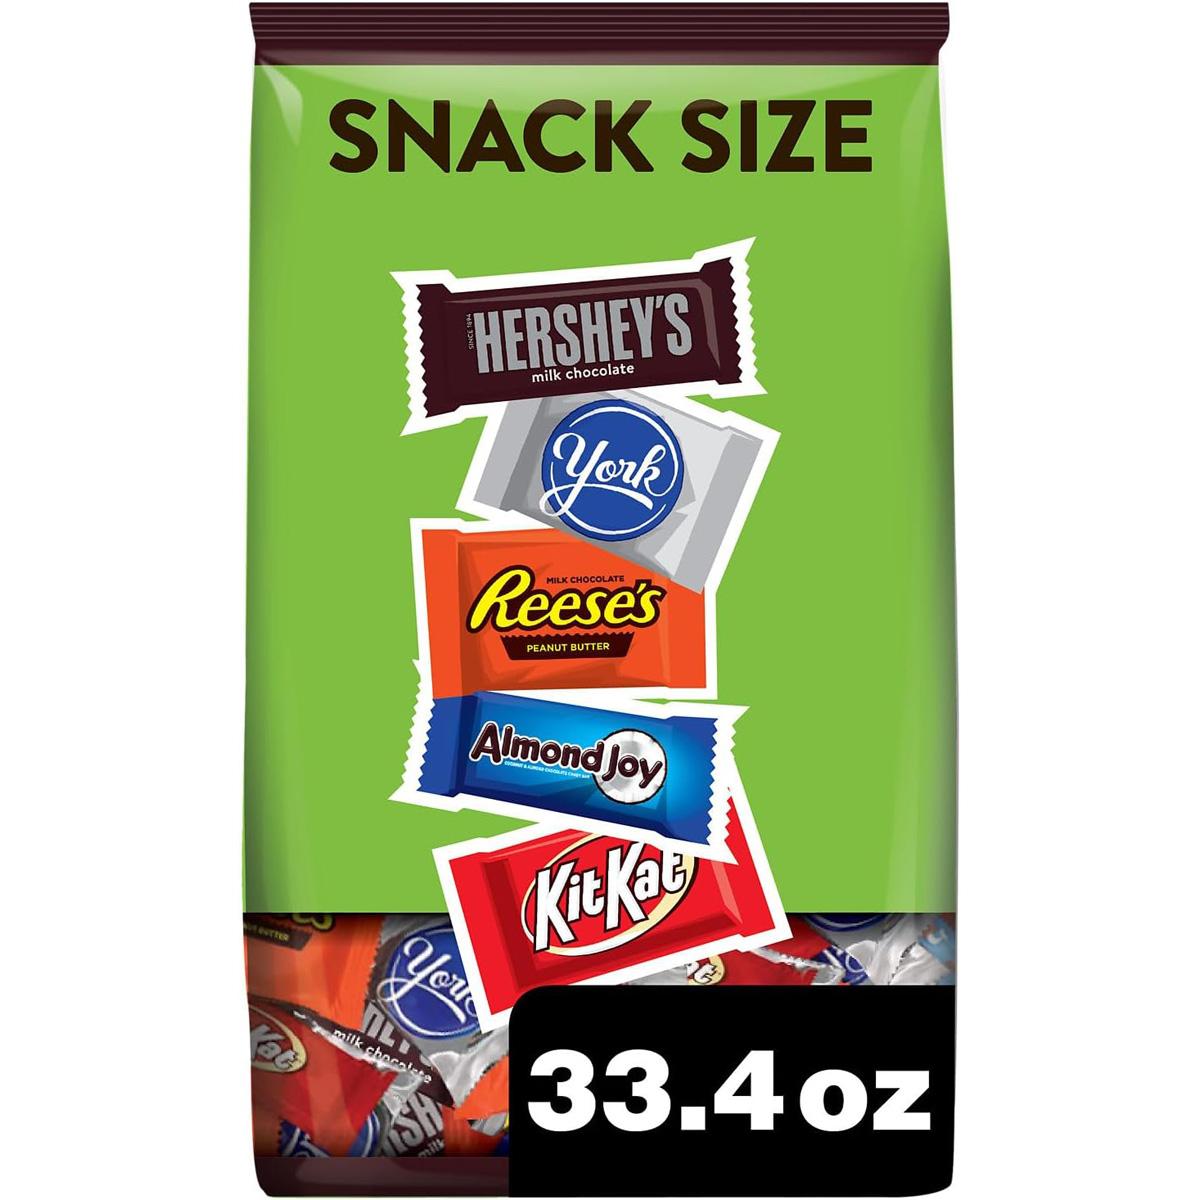 Hershey Assorted Snack Size Christmas Candy Party Pack for $8.80 Shipped